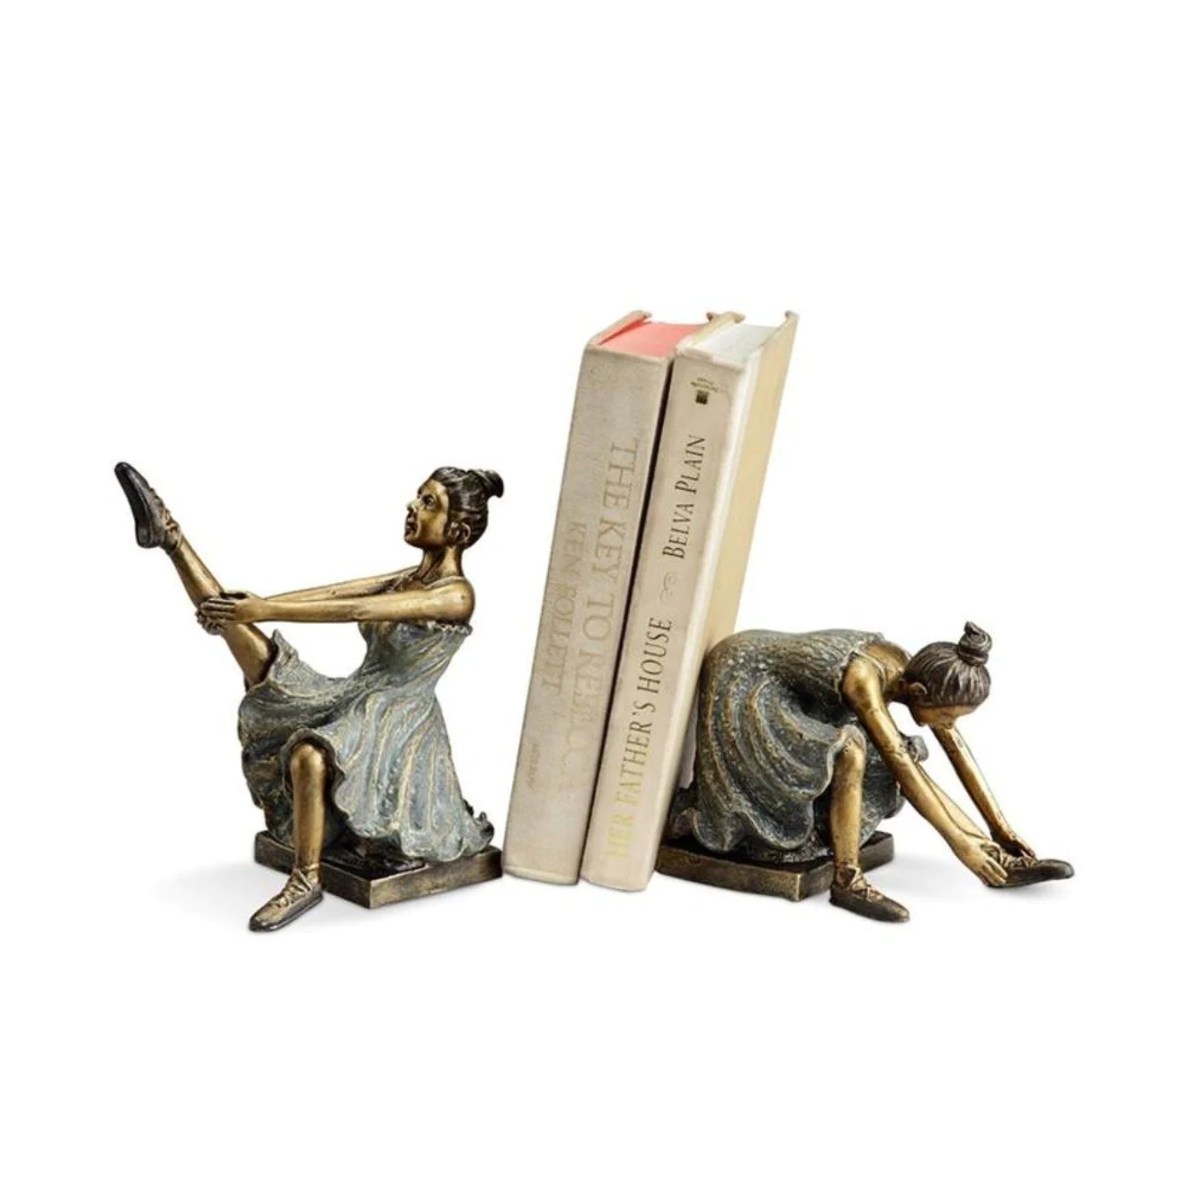 10. Unique Iron Bookends: A Thoughtful and Modern Anniversary Gift Idea for Her